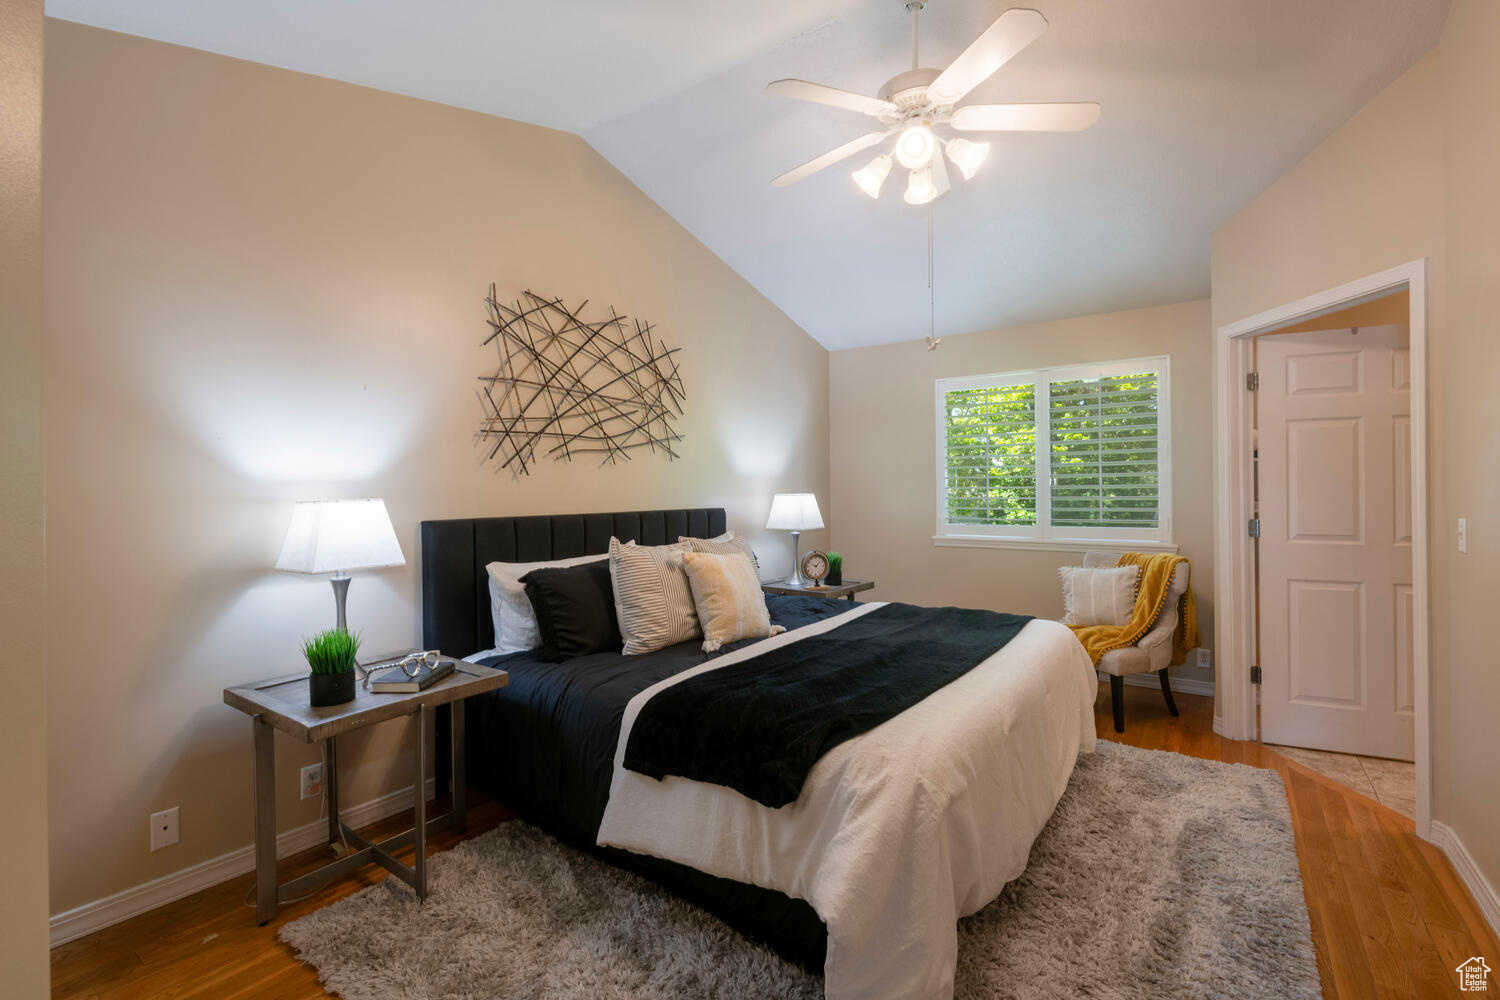 Master Bedroom with hardwood flooring, ceiling fan, and vaulted ceiling